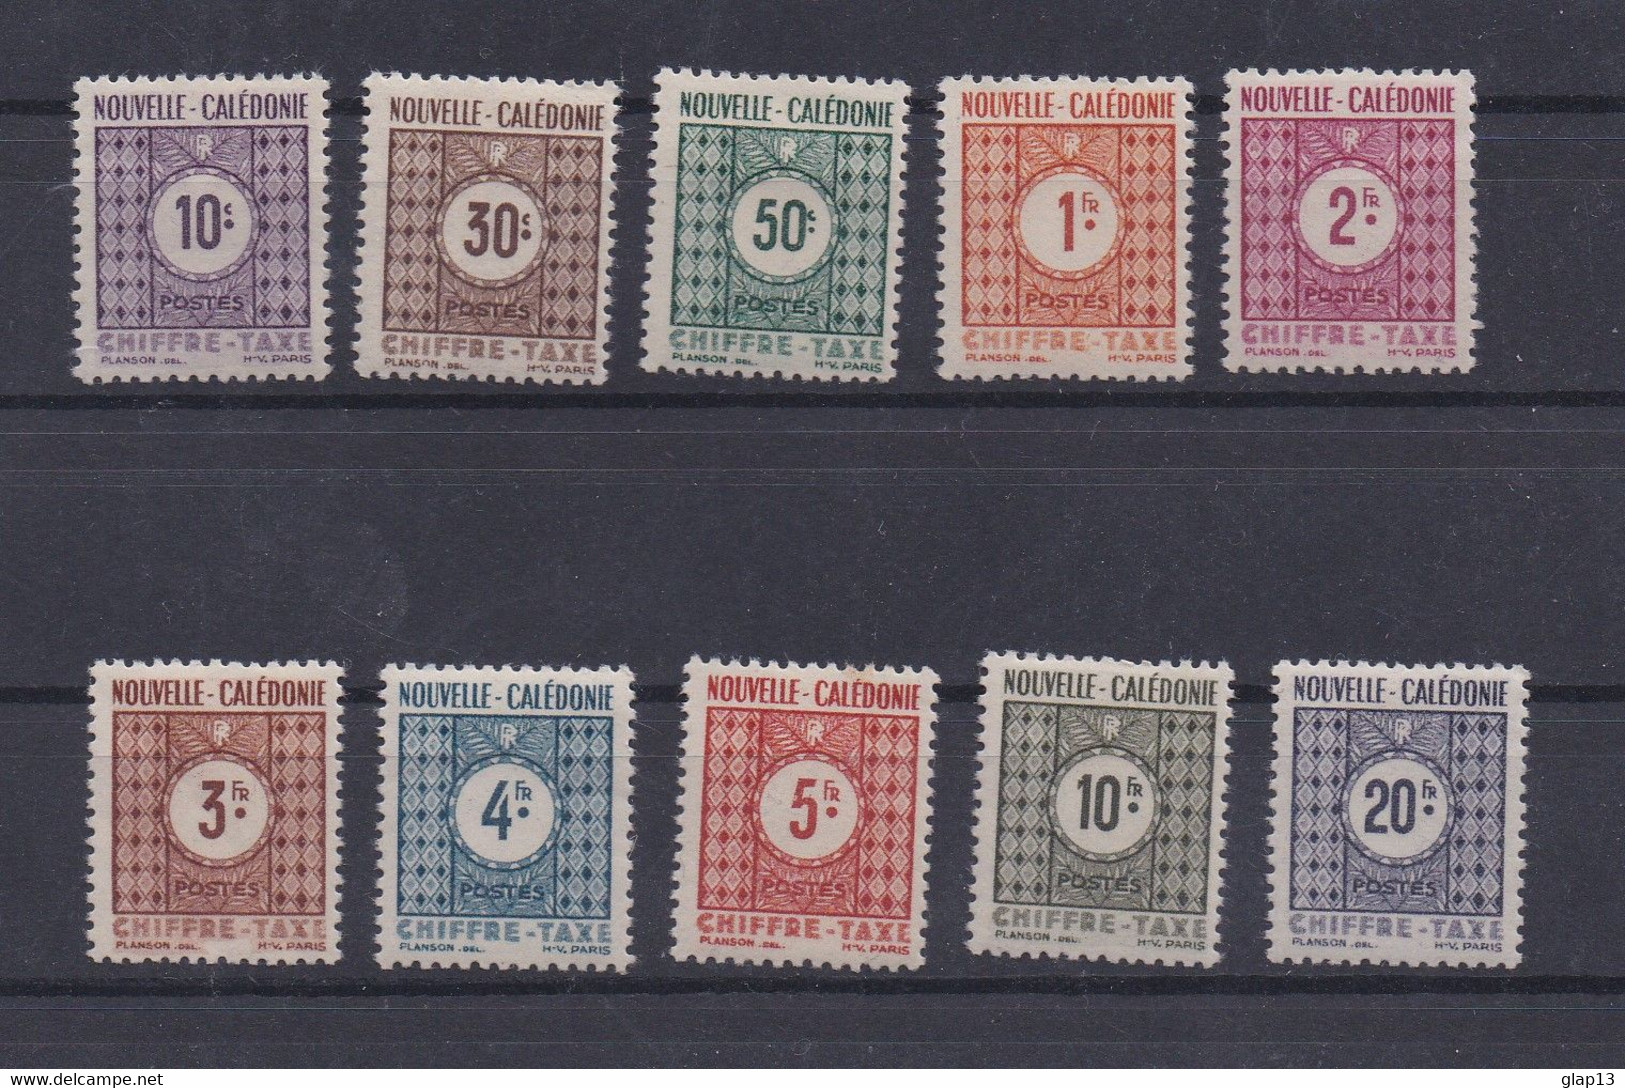 NOUVELLE CALEDONIE 1948 TAXE N°39/48 NEUFS AVEC CHARNIERE - Timbres-taxe